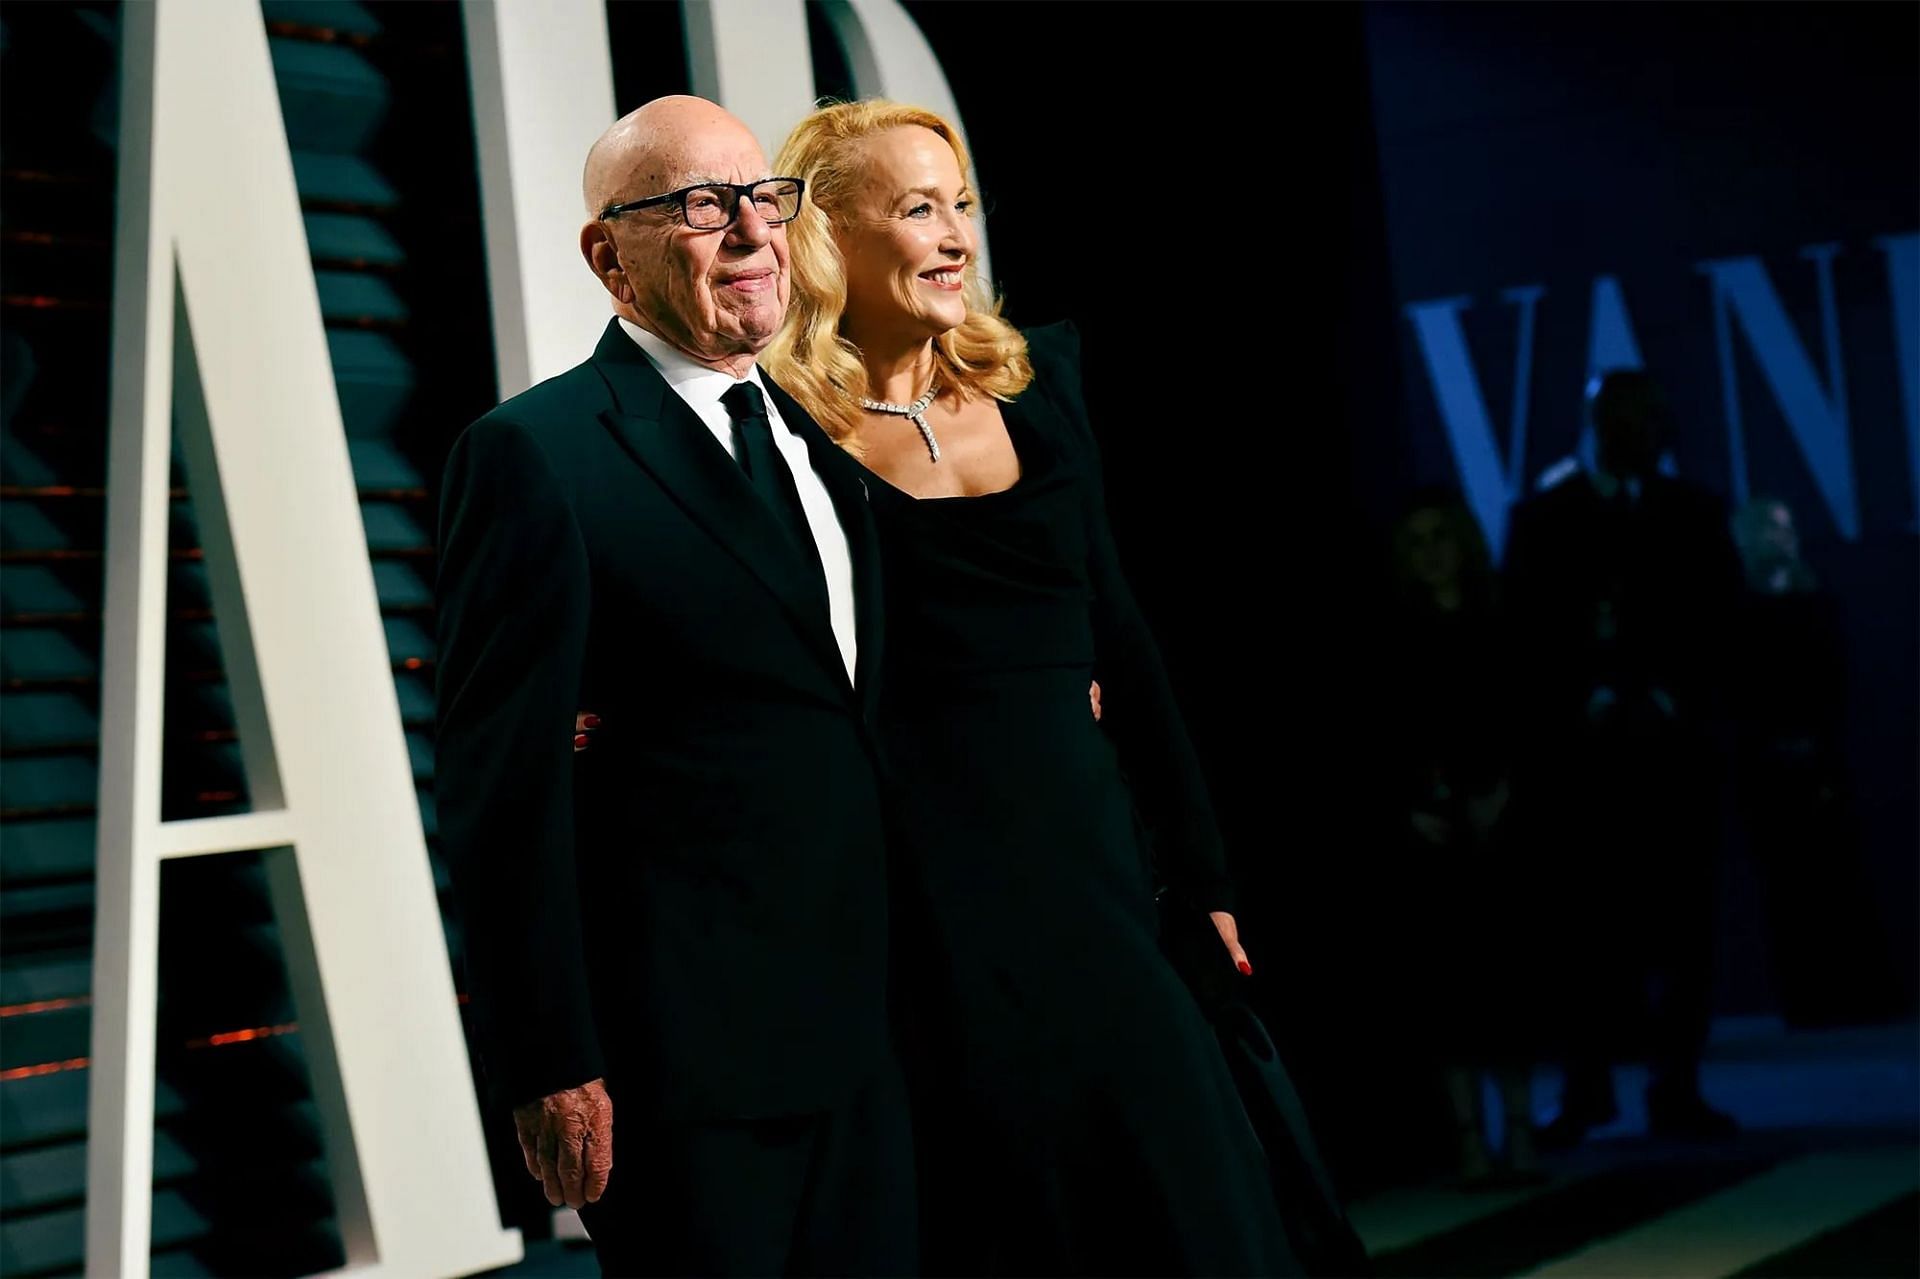 Hall and Murdoch (Image via Mike Coppola/VFI7/Getty Images)